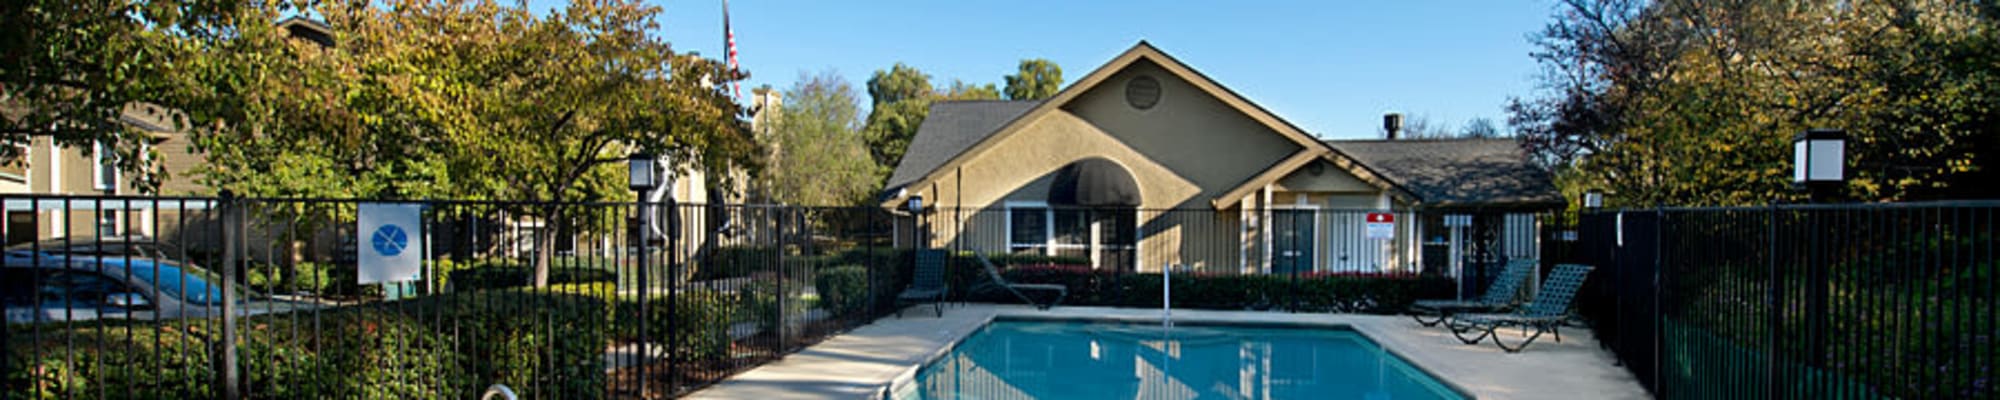 Photo gallery at Sterling Heights Apartment Homes in Benicia, California